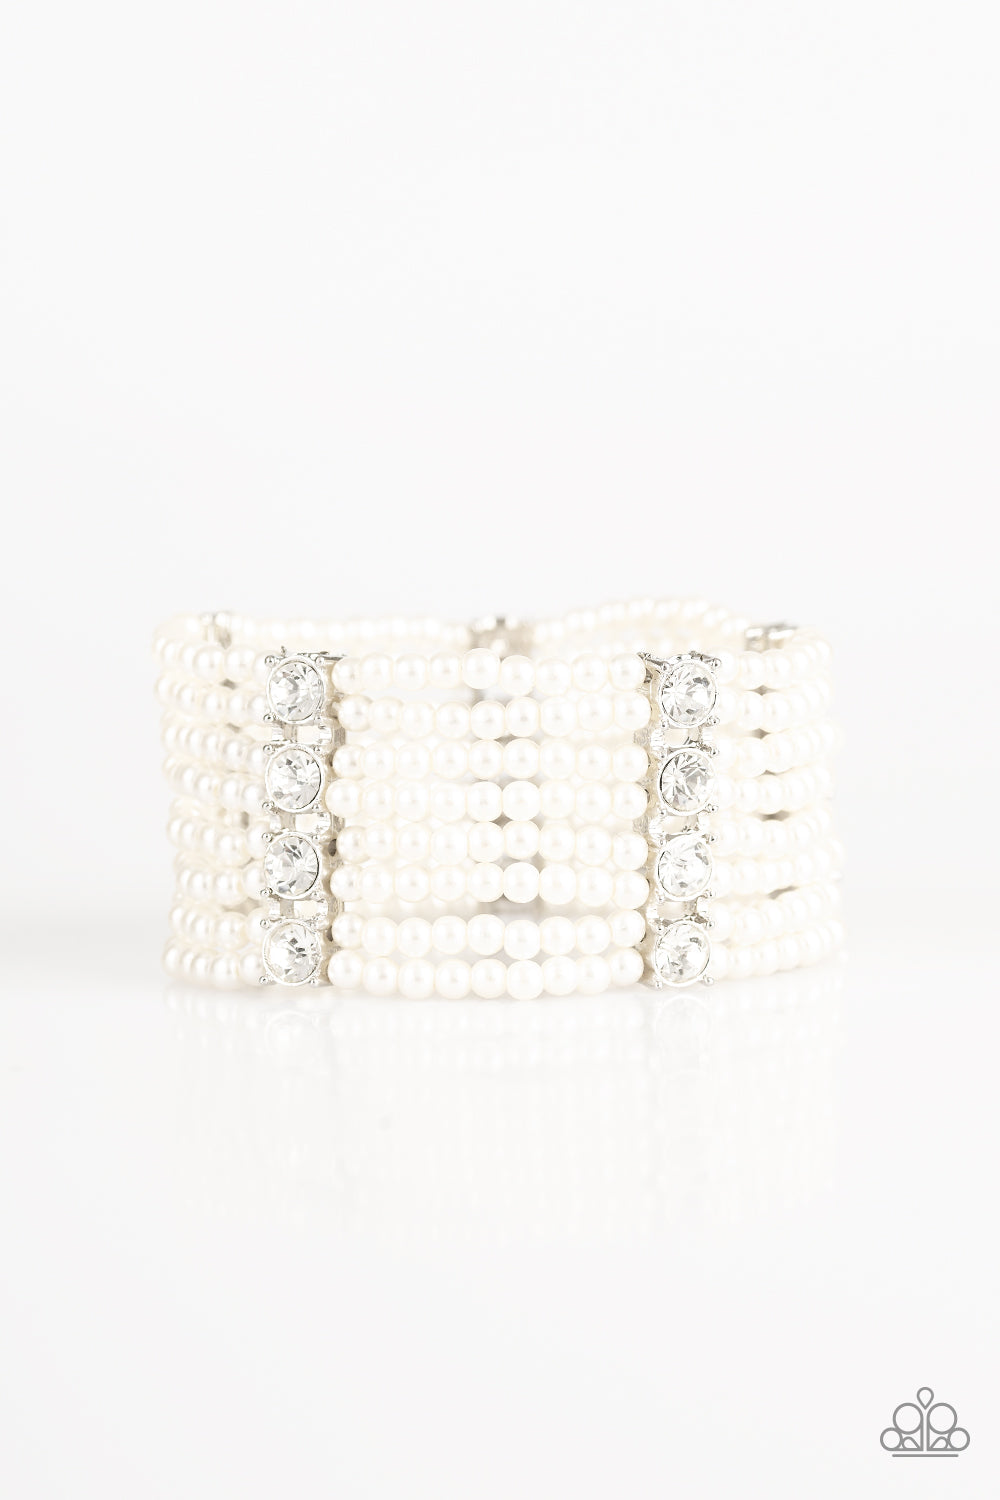 Paparazzi Accessories Get in Line - White Bracelets - Lady T Accessories